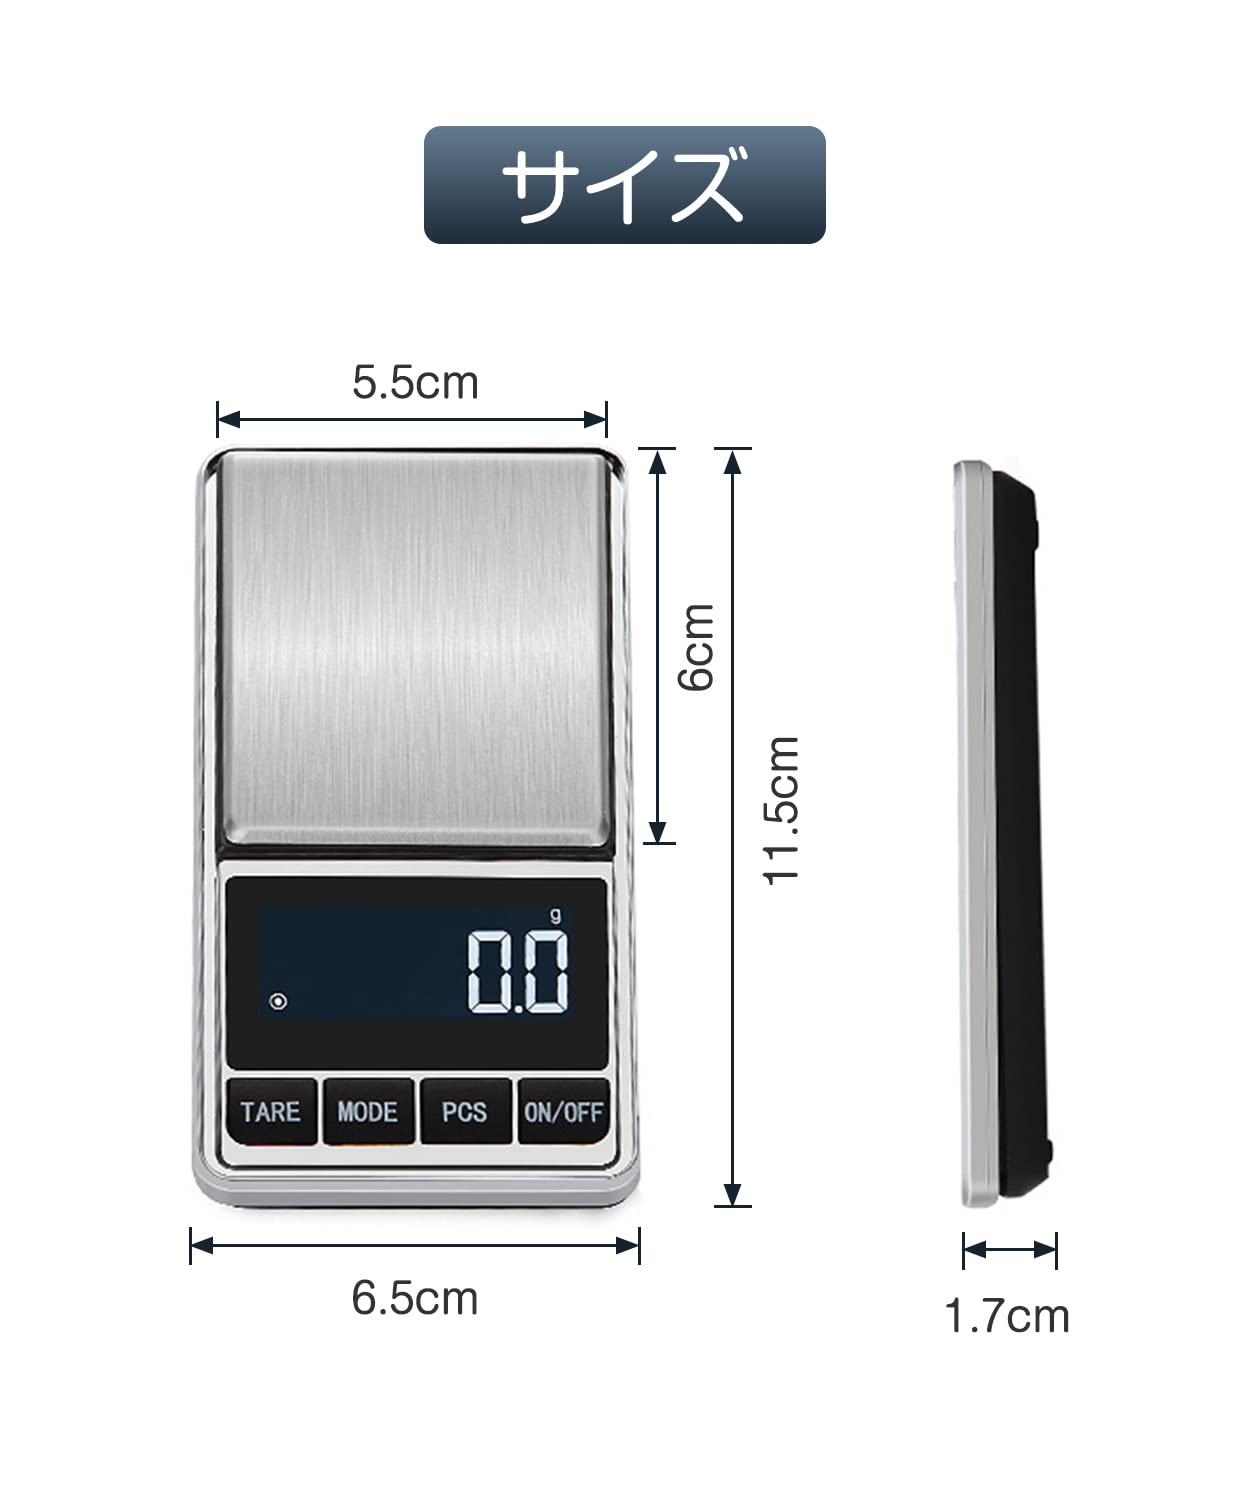  digital scale 0.1g unit 1KG precise pocket scale digital total . mobile type .. scale scales business use professional height precise measurement weighing scale light weight 